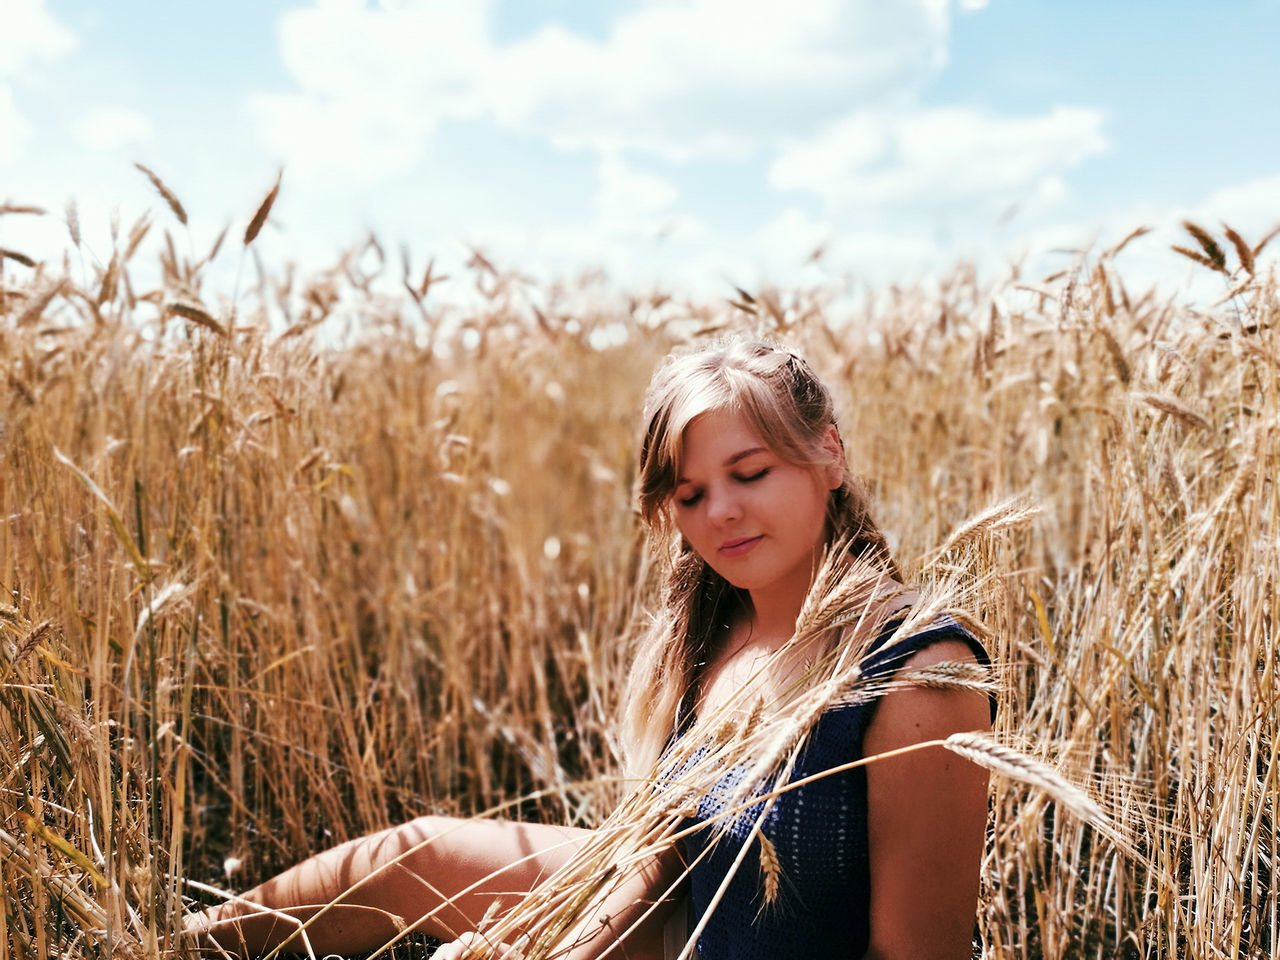 one person, field, land, plant, real people, leisure activity, sky, young adult, young women, lifestyles, nature, agriculture, blond hair, women, beautiful woman, hair, day, beauty, crop, hairstyle, outdoors